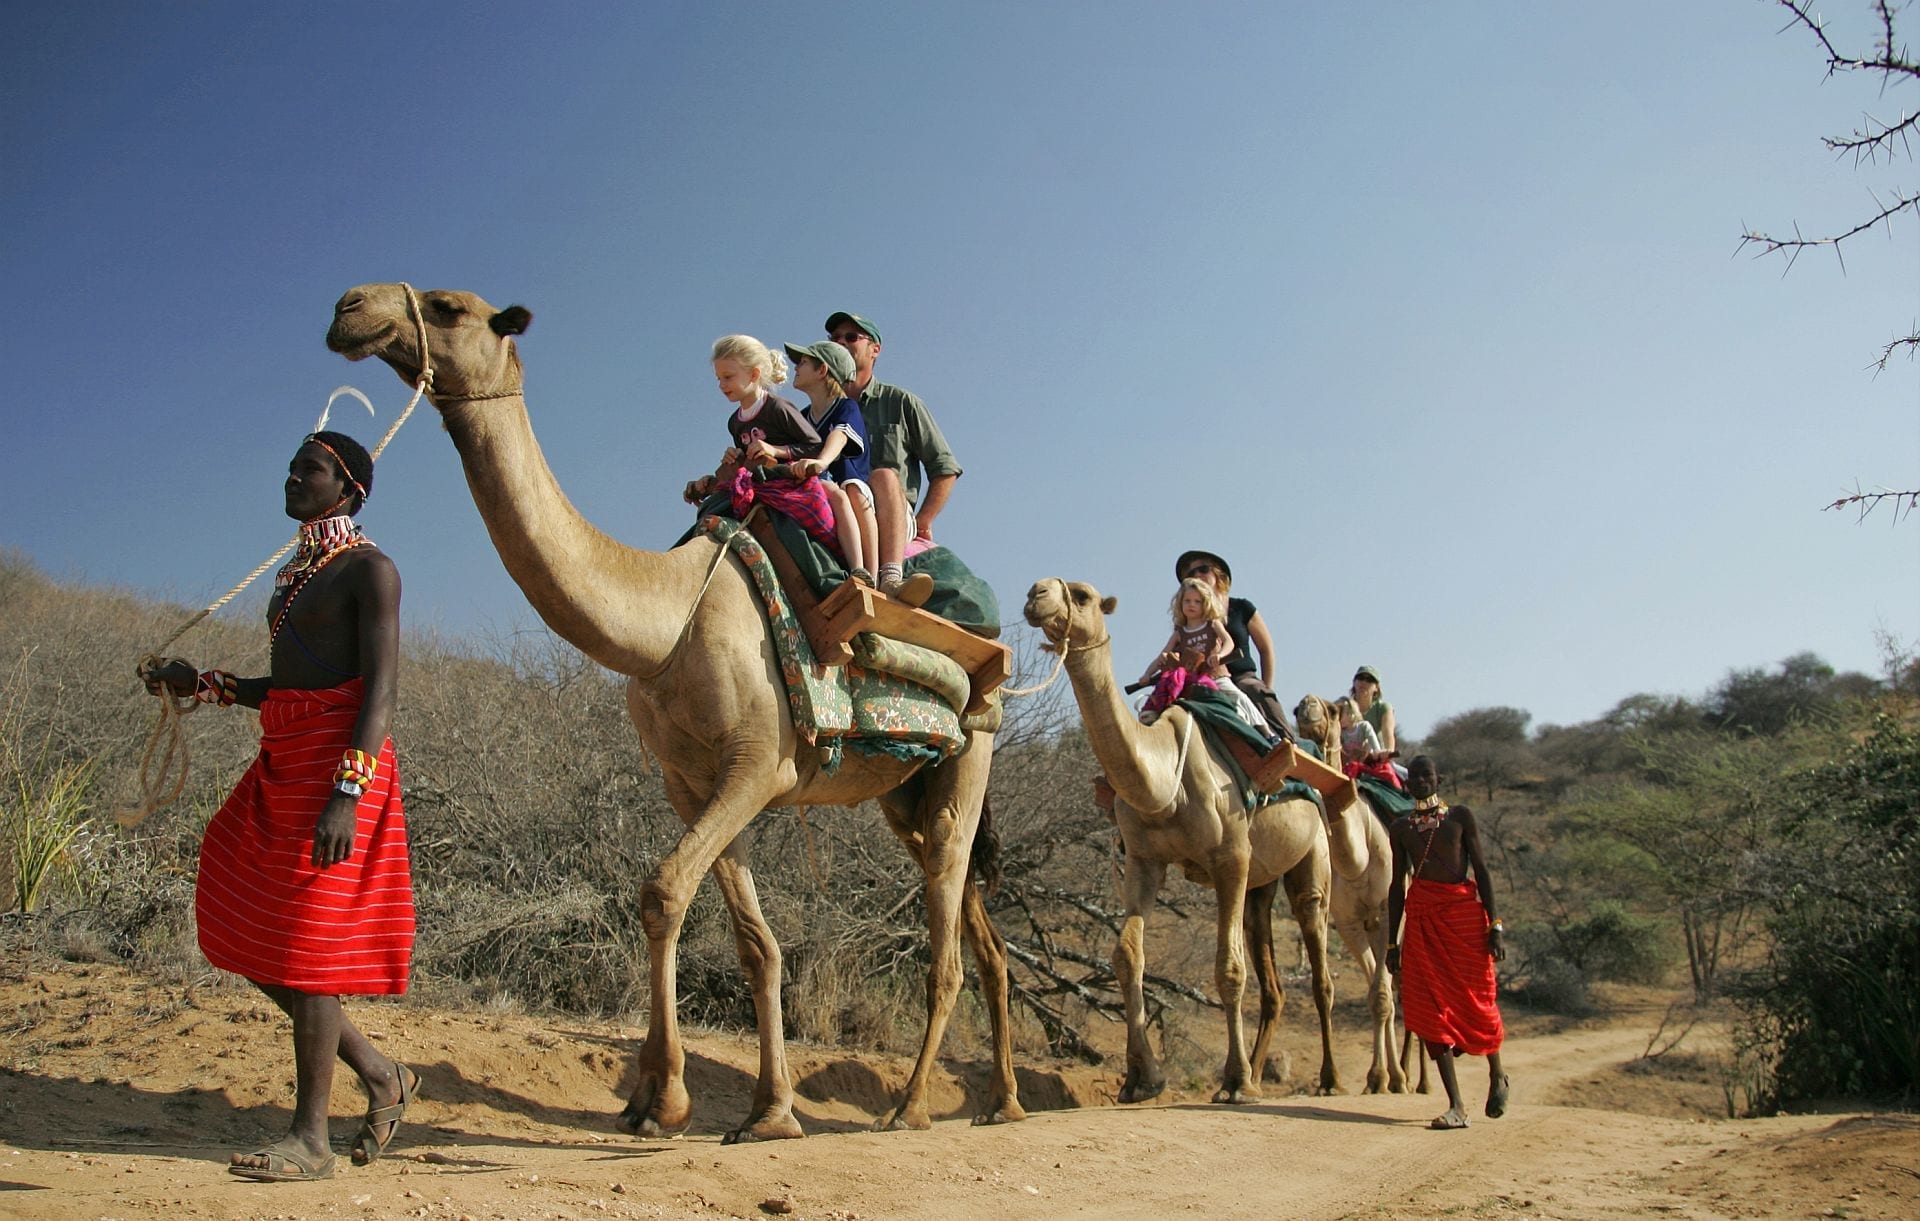 Family adventure safaris & holidays in Africa